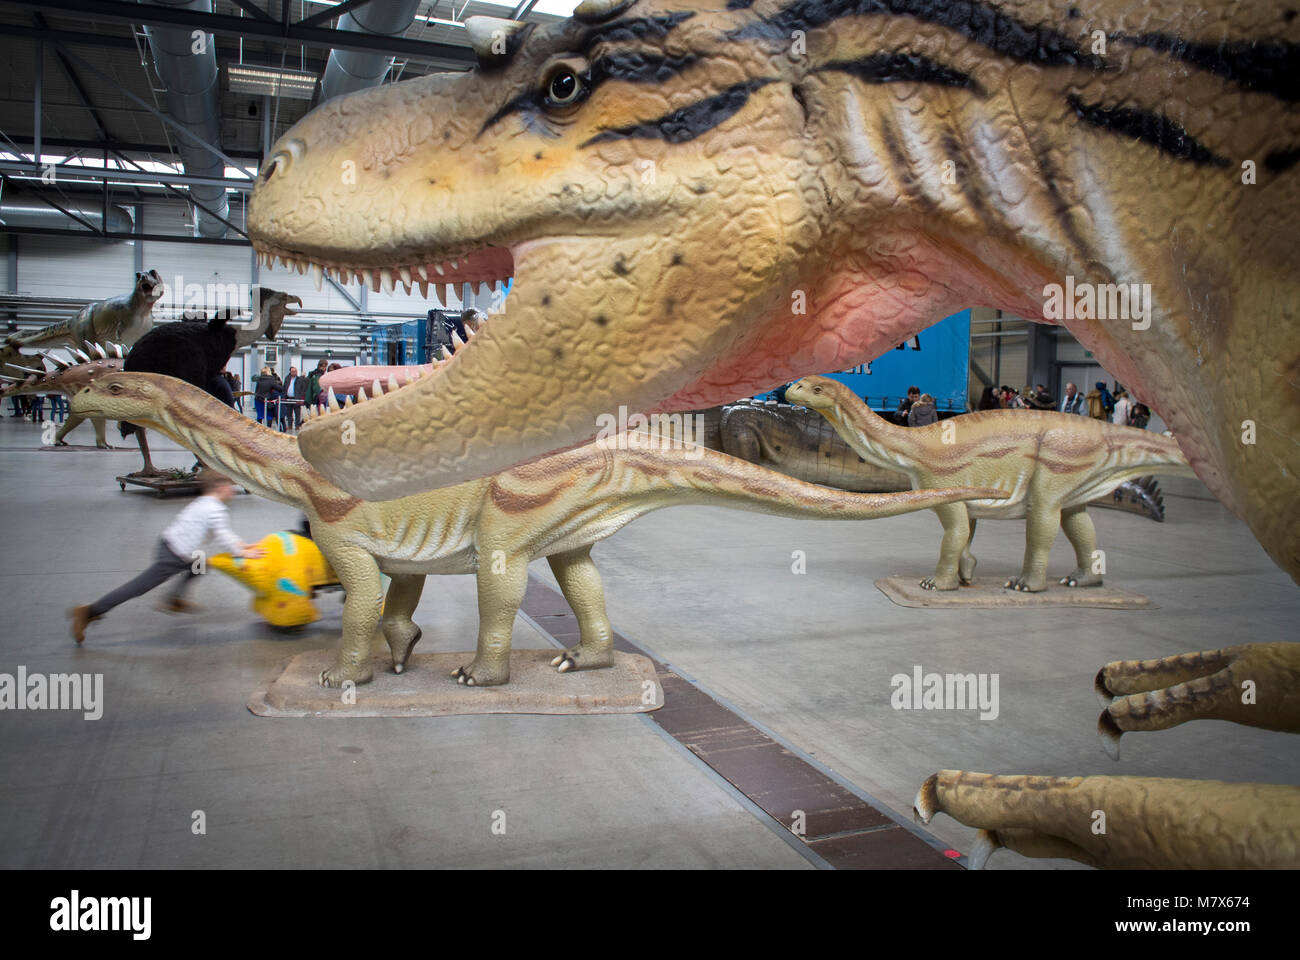 Dinosaurs at an exhibition at Messe Arena, Halle, Saxony-Anhalt, Germany. Stock Photo